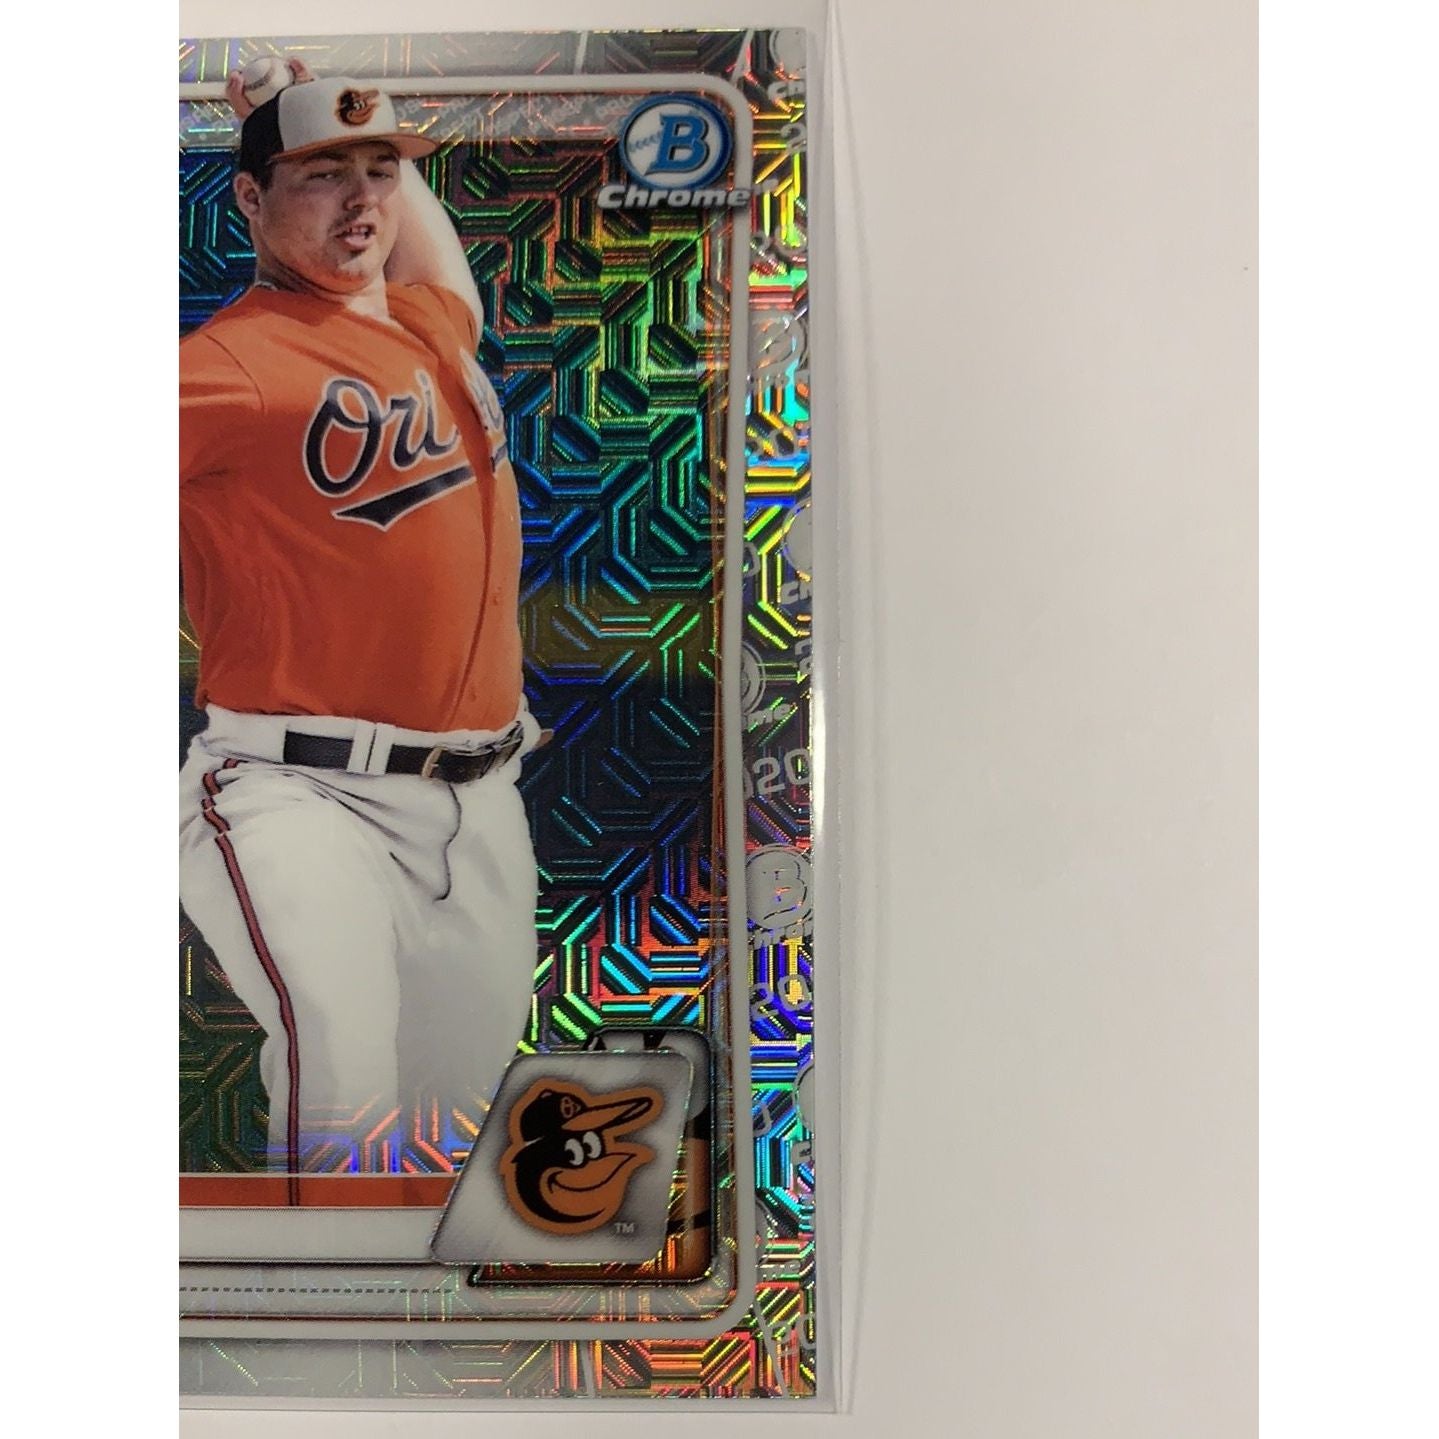  2020 Bowman Chrome Keegan Akin Mojo Refractor  Local Legends Cards & Collectibles